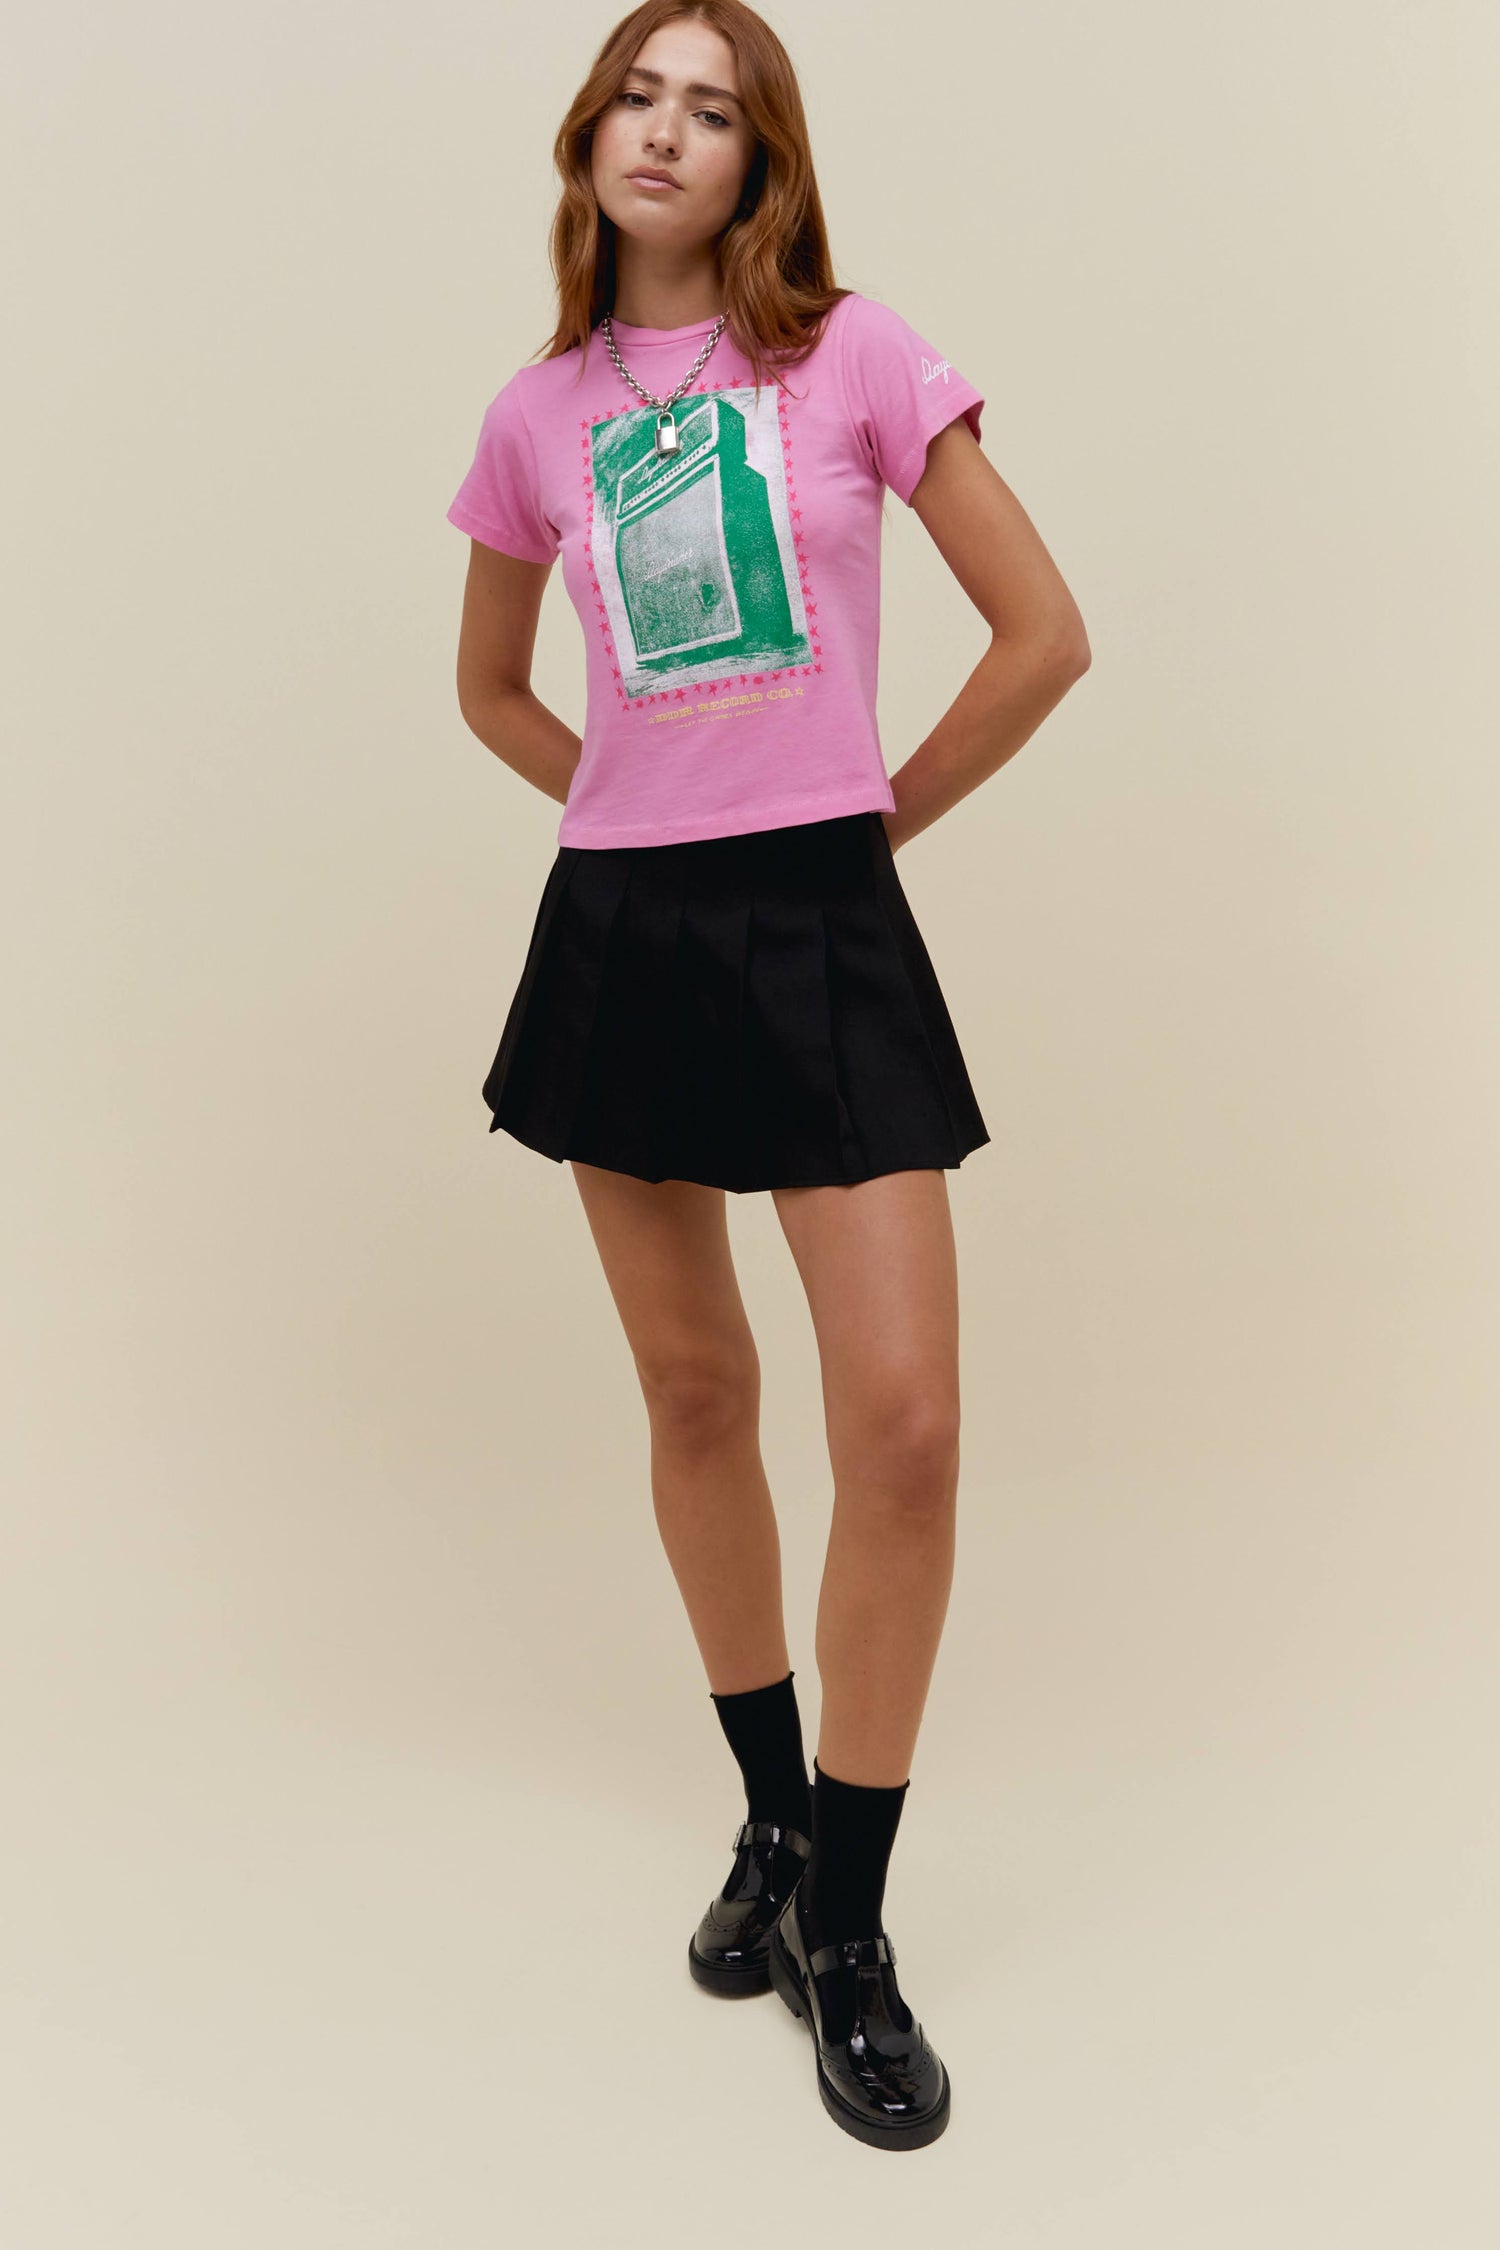 A model featuring a pink vintage tee with a distressed amp graphic.